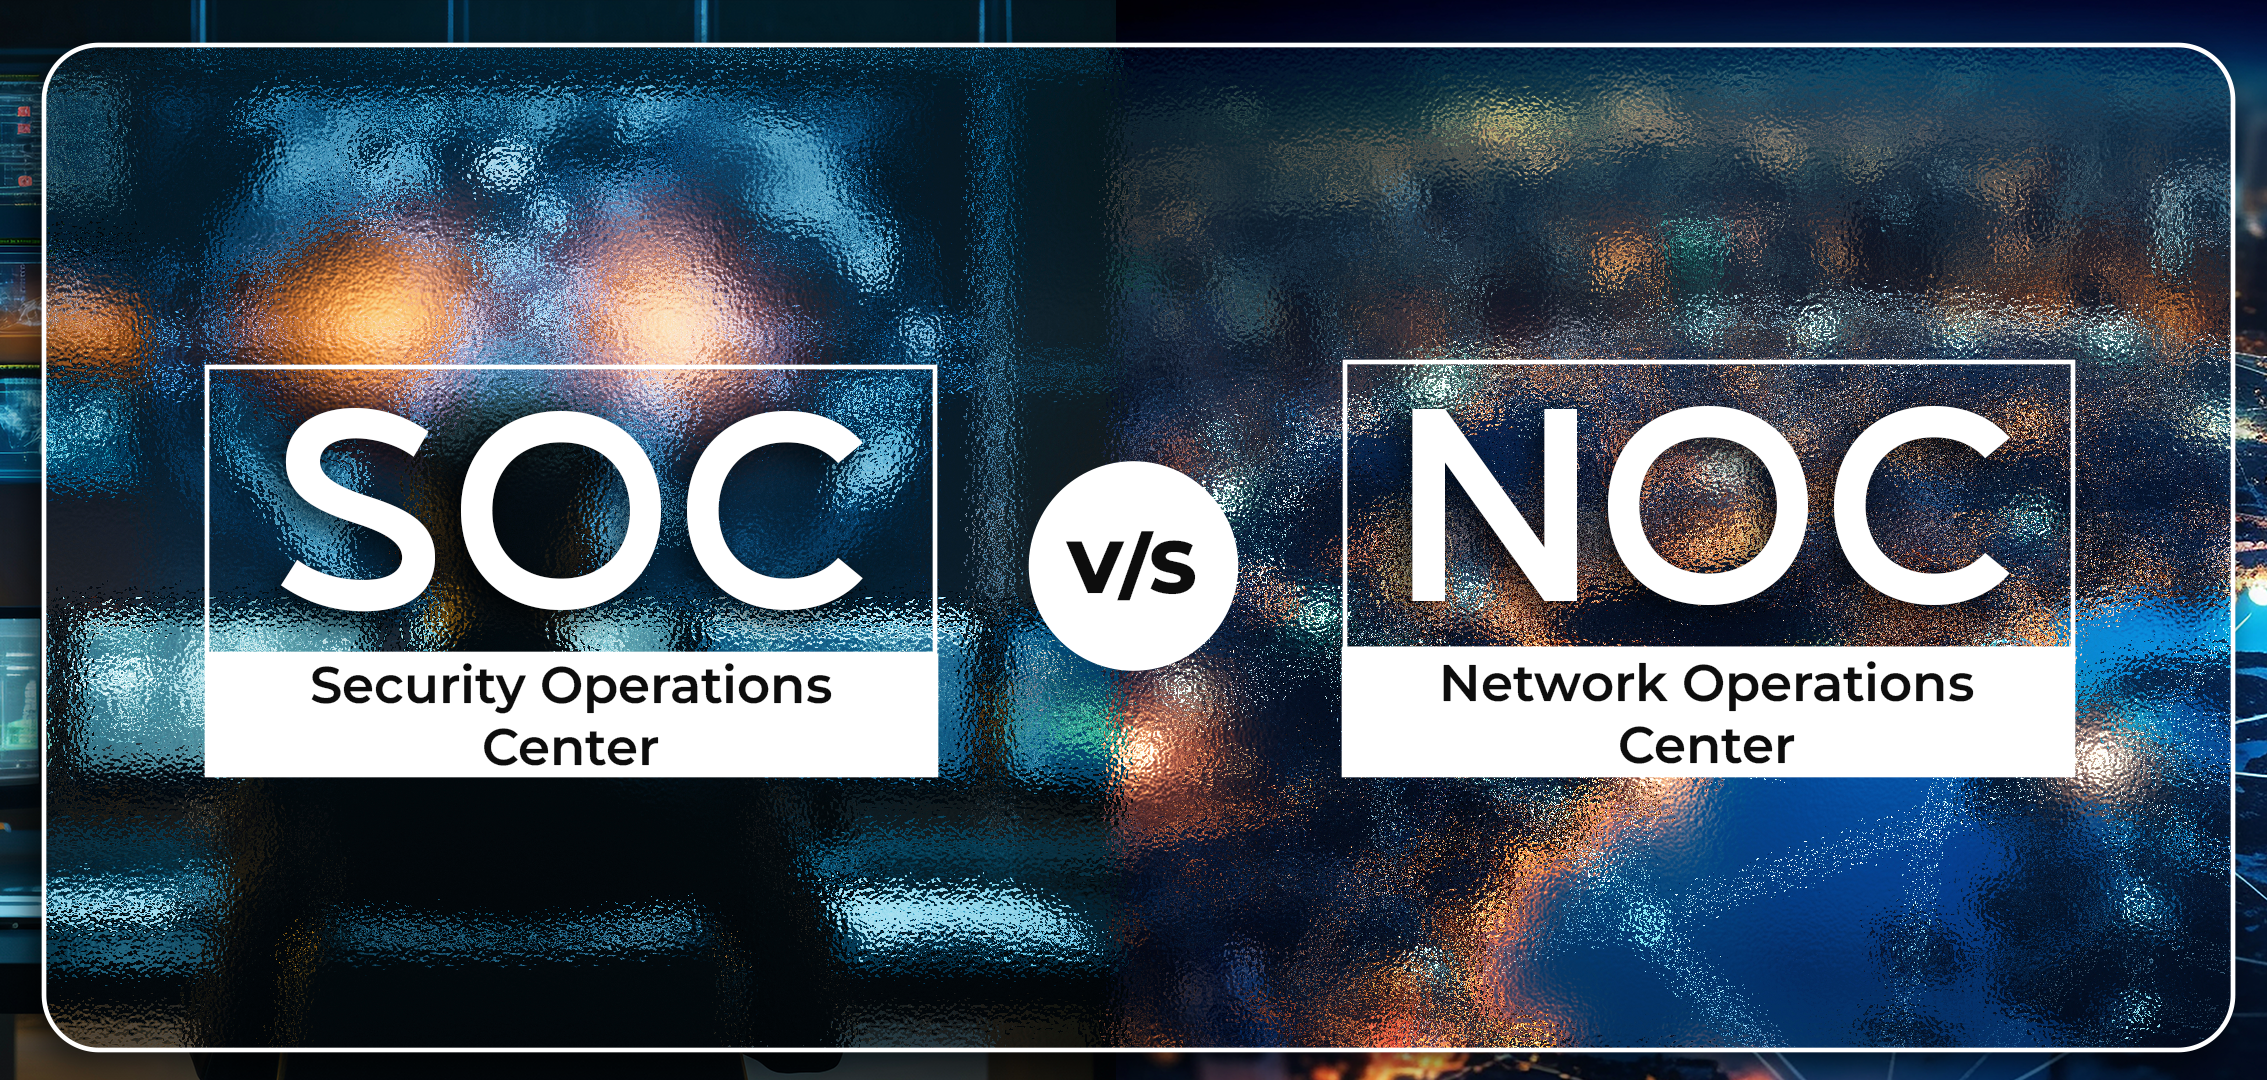 Security (SOC) Vs Network Operations Center (NOC): Way to safeguard business security